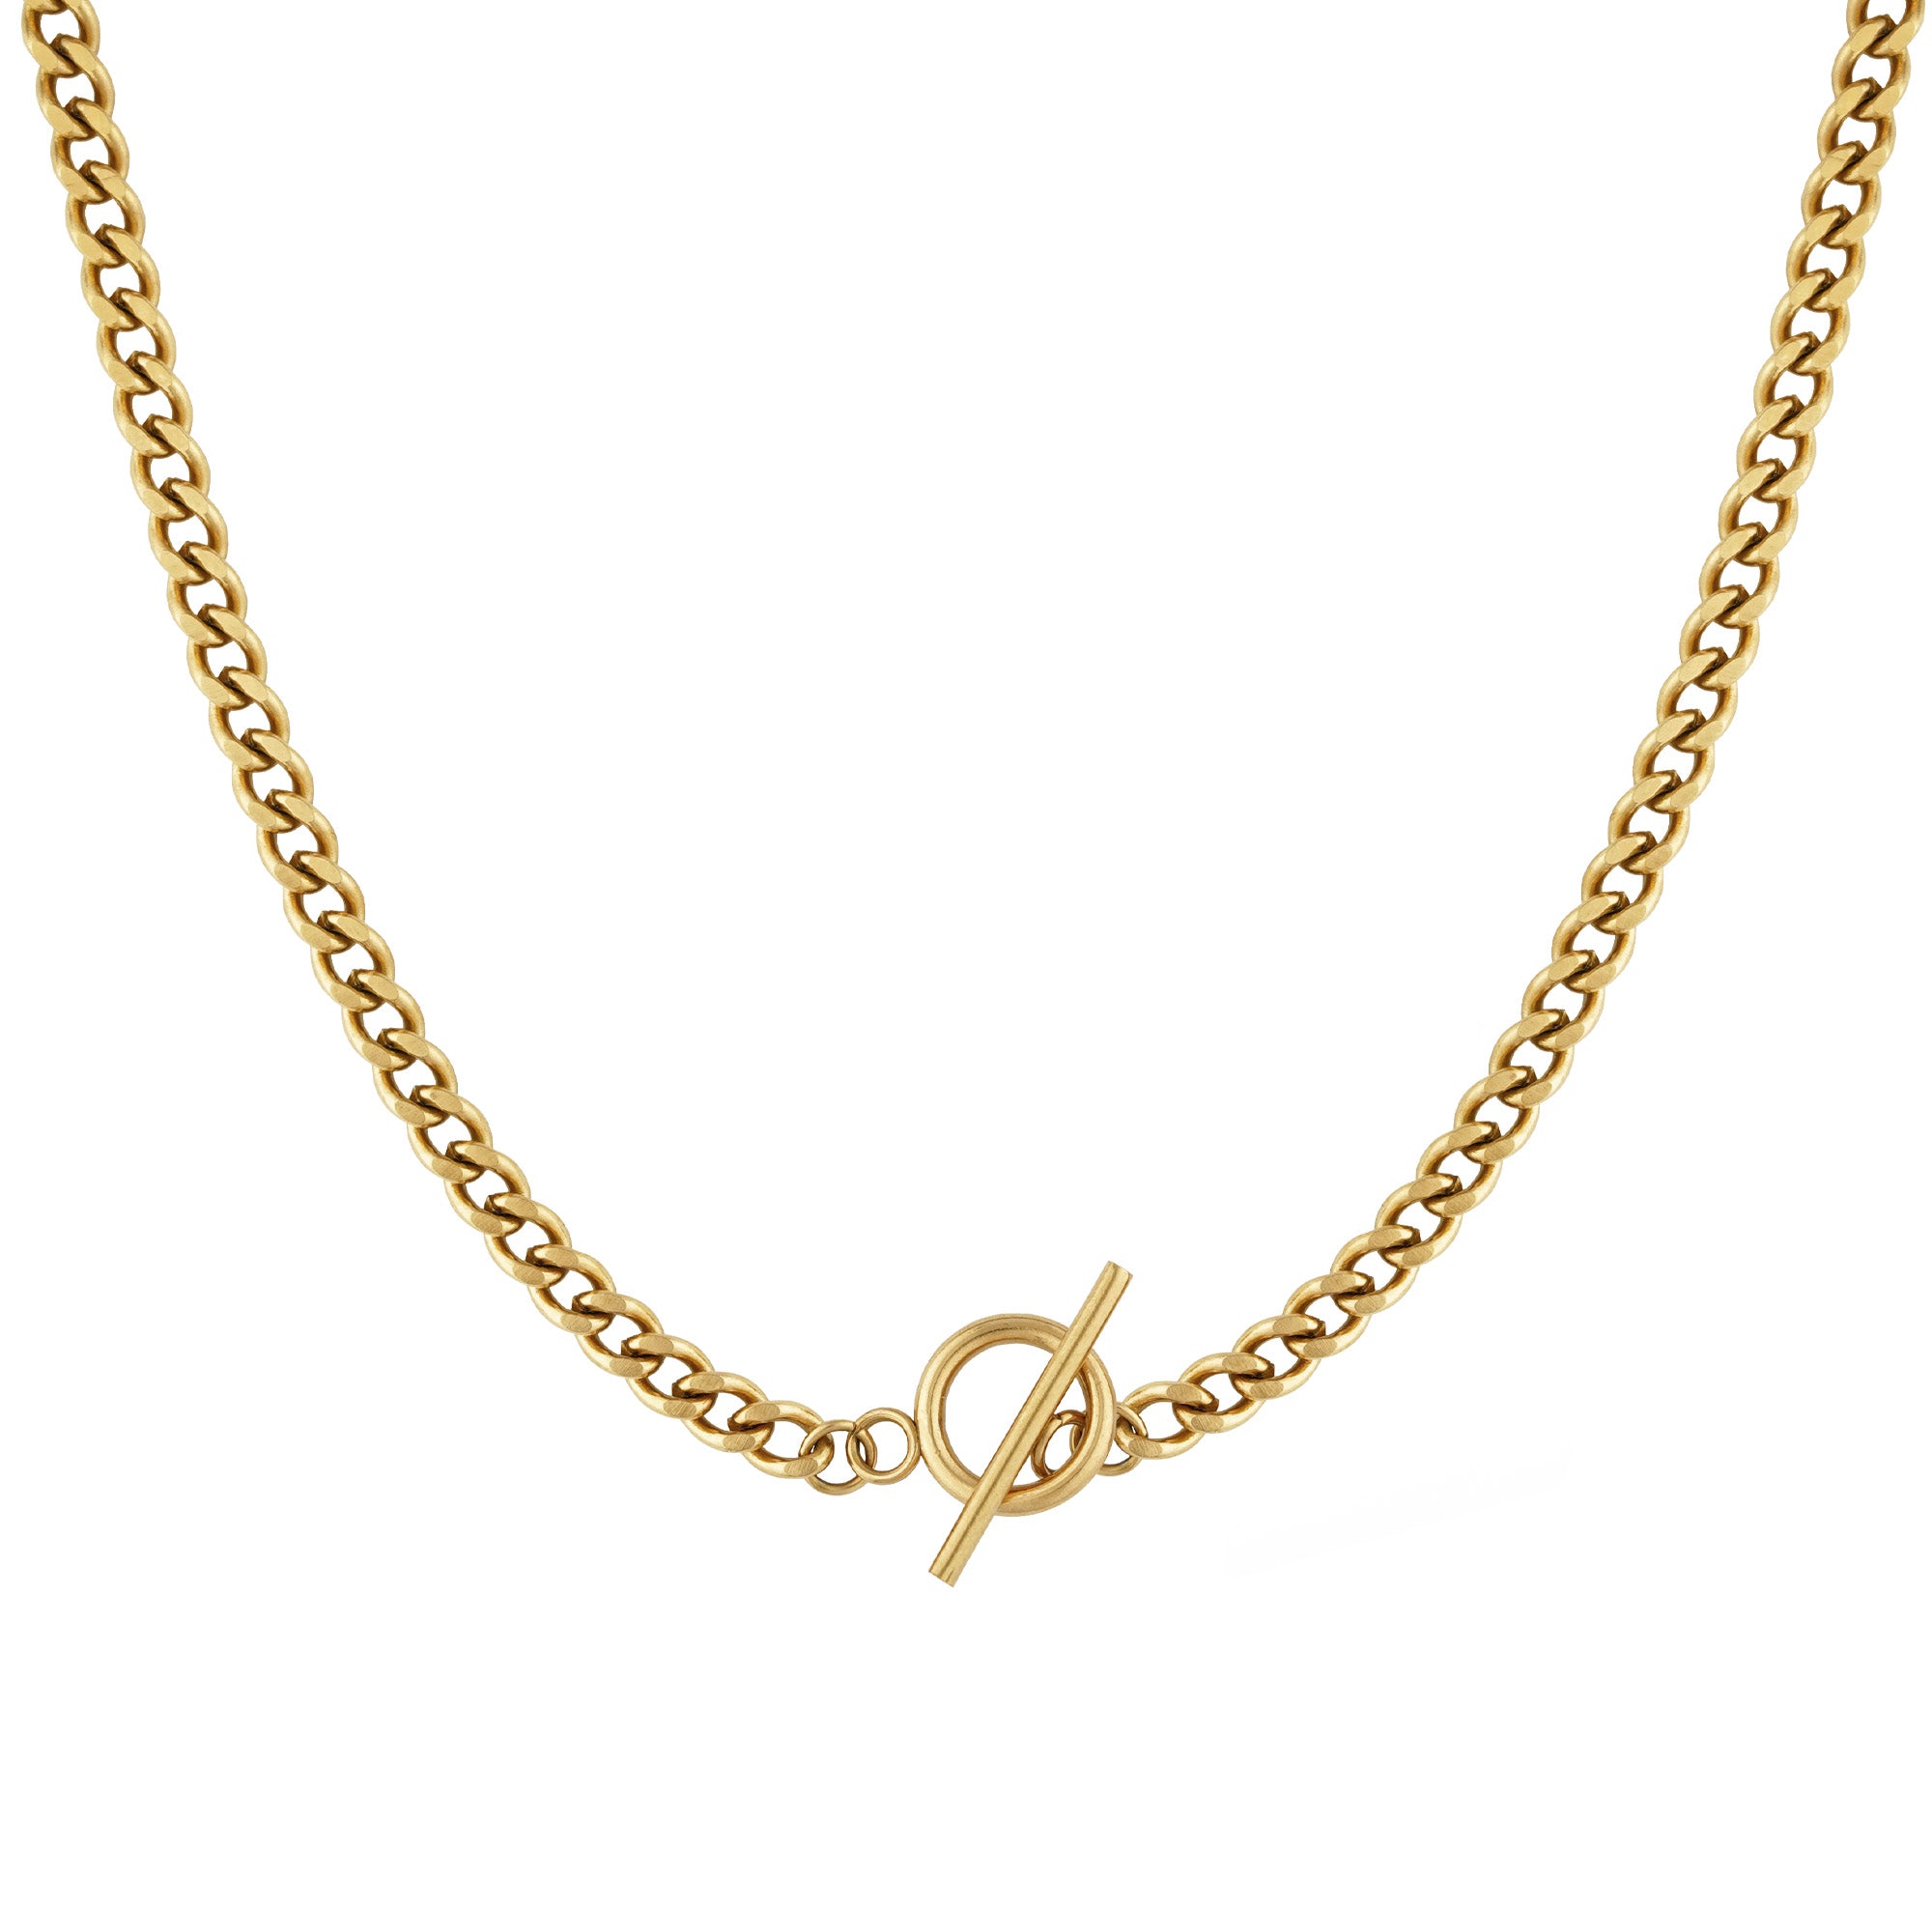 Jucar necklace from Five Jwlry, designed in Montreal, Canada. Features a Cuban chain link in gold-colored, ultra-resistant 316L stainless steel with a distinctive circular toggle clasp closure.